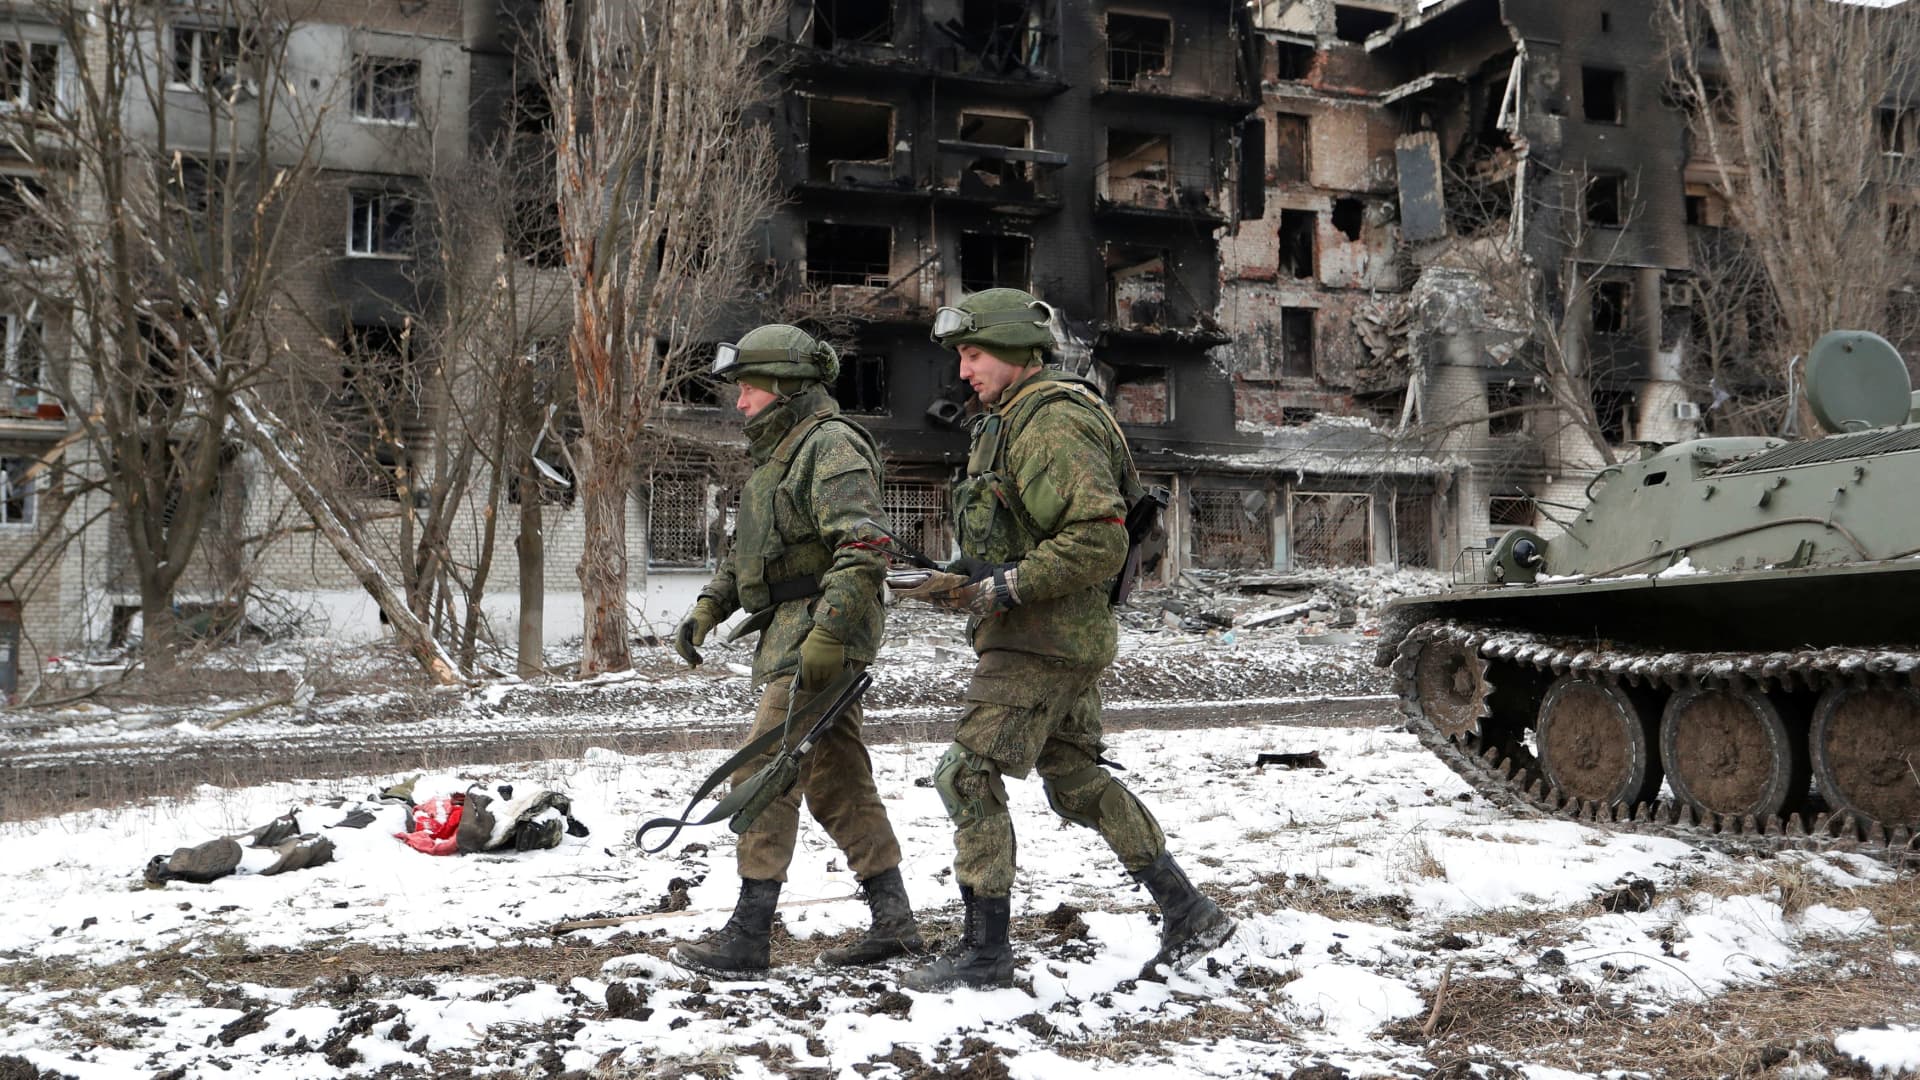 Service members of pro-Russian troops in uniforms without insignia walk near a residential building which was heavily damaged during Ukraine-Russia conflict in the separatist-controlled town of Volnovakha in the Donetsk region, Ukraine March 11, 2022.